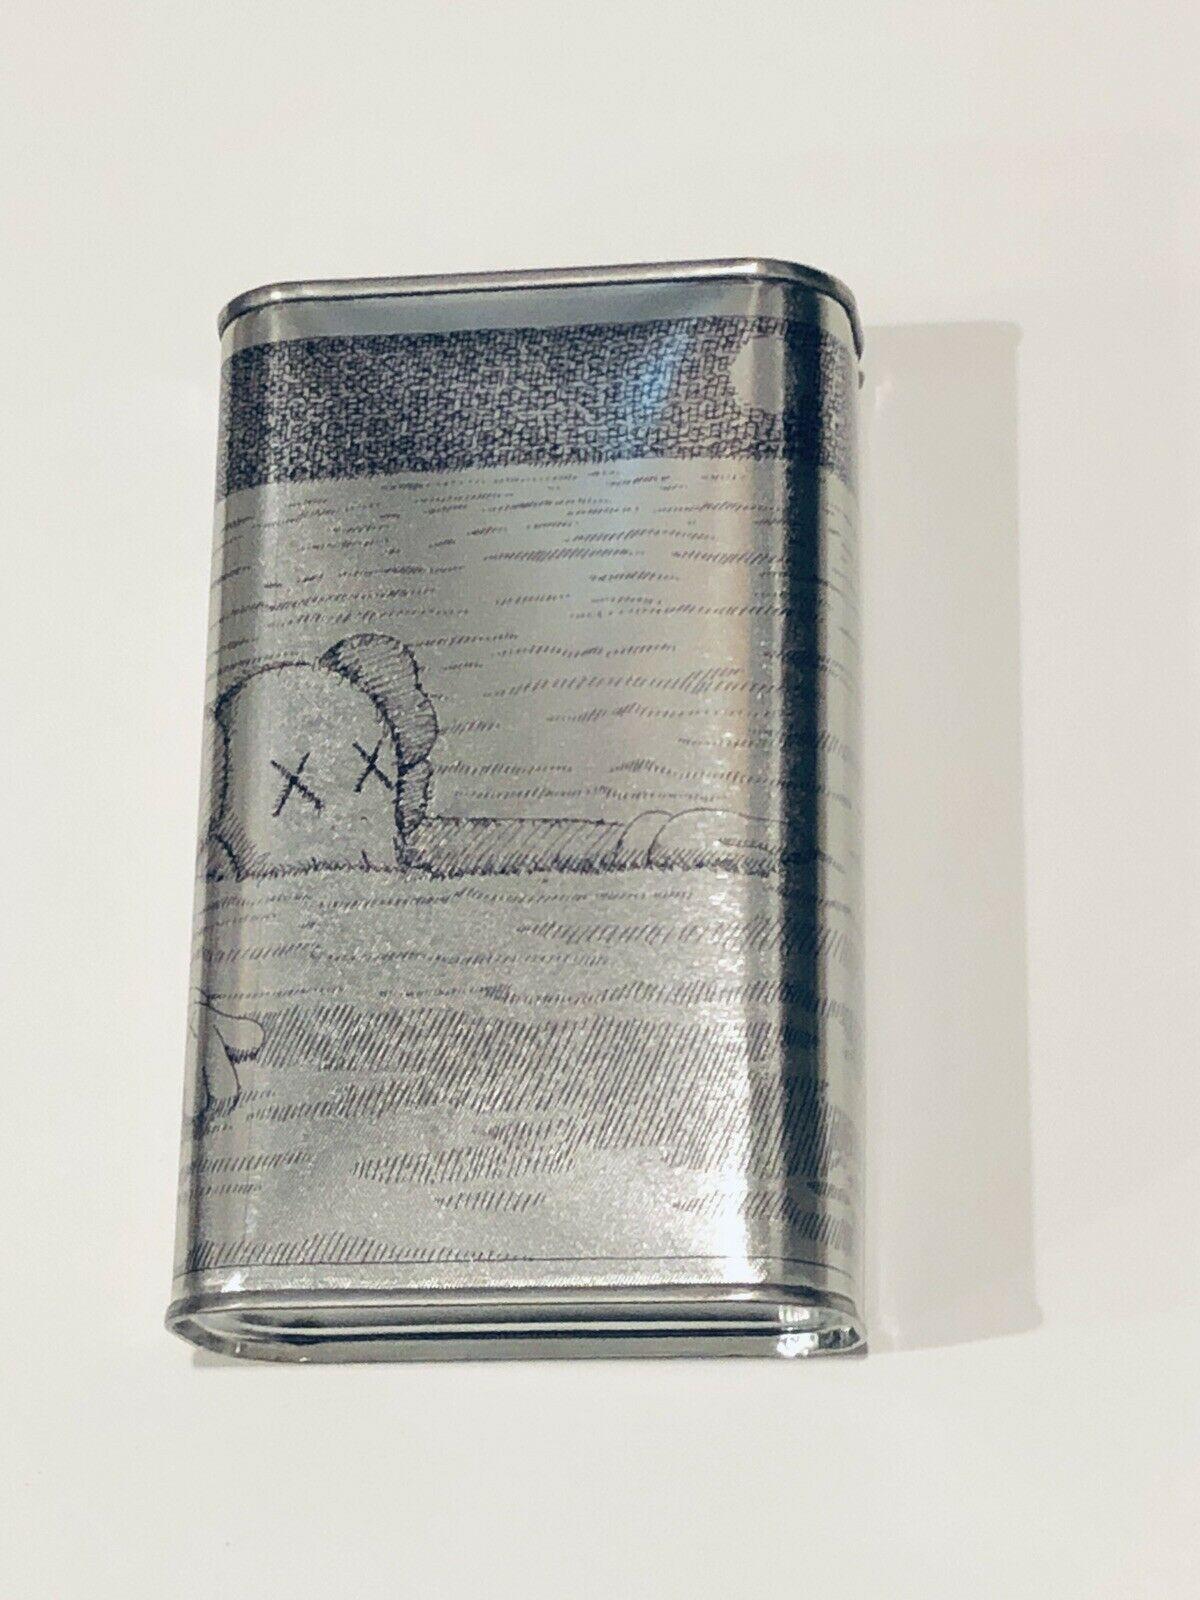 KAWS limited edition of 500 Olive Oil Tins From Italy with Due Leoni Street Art  For Sale 2